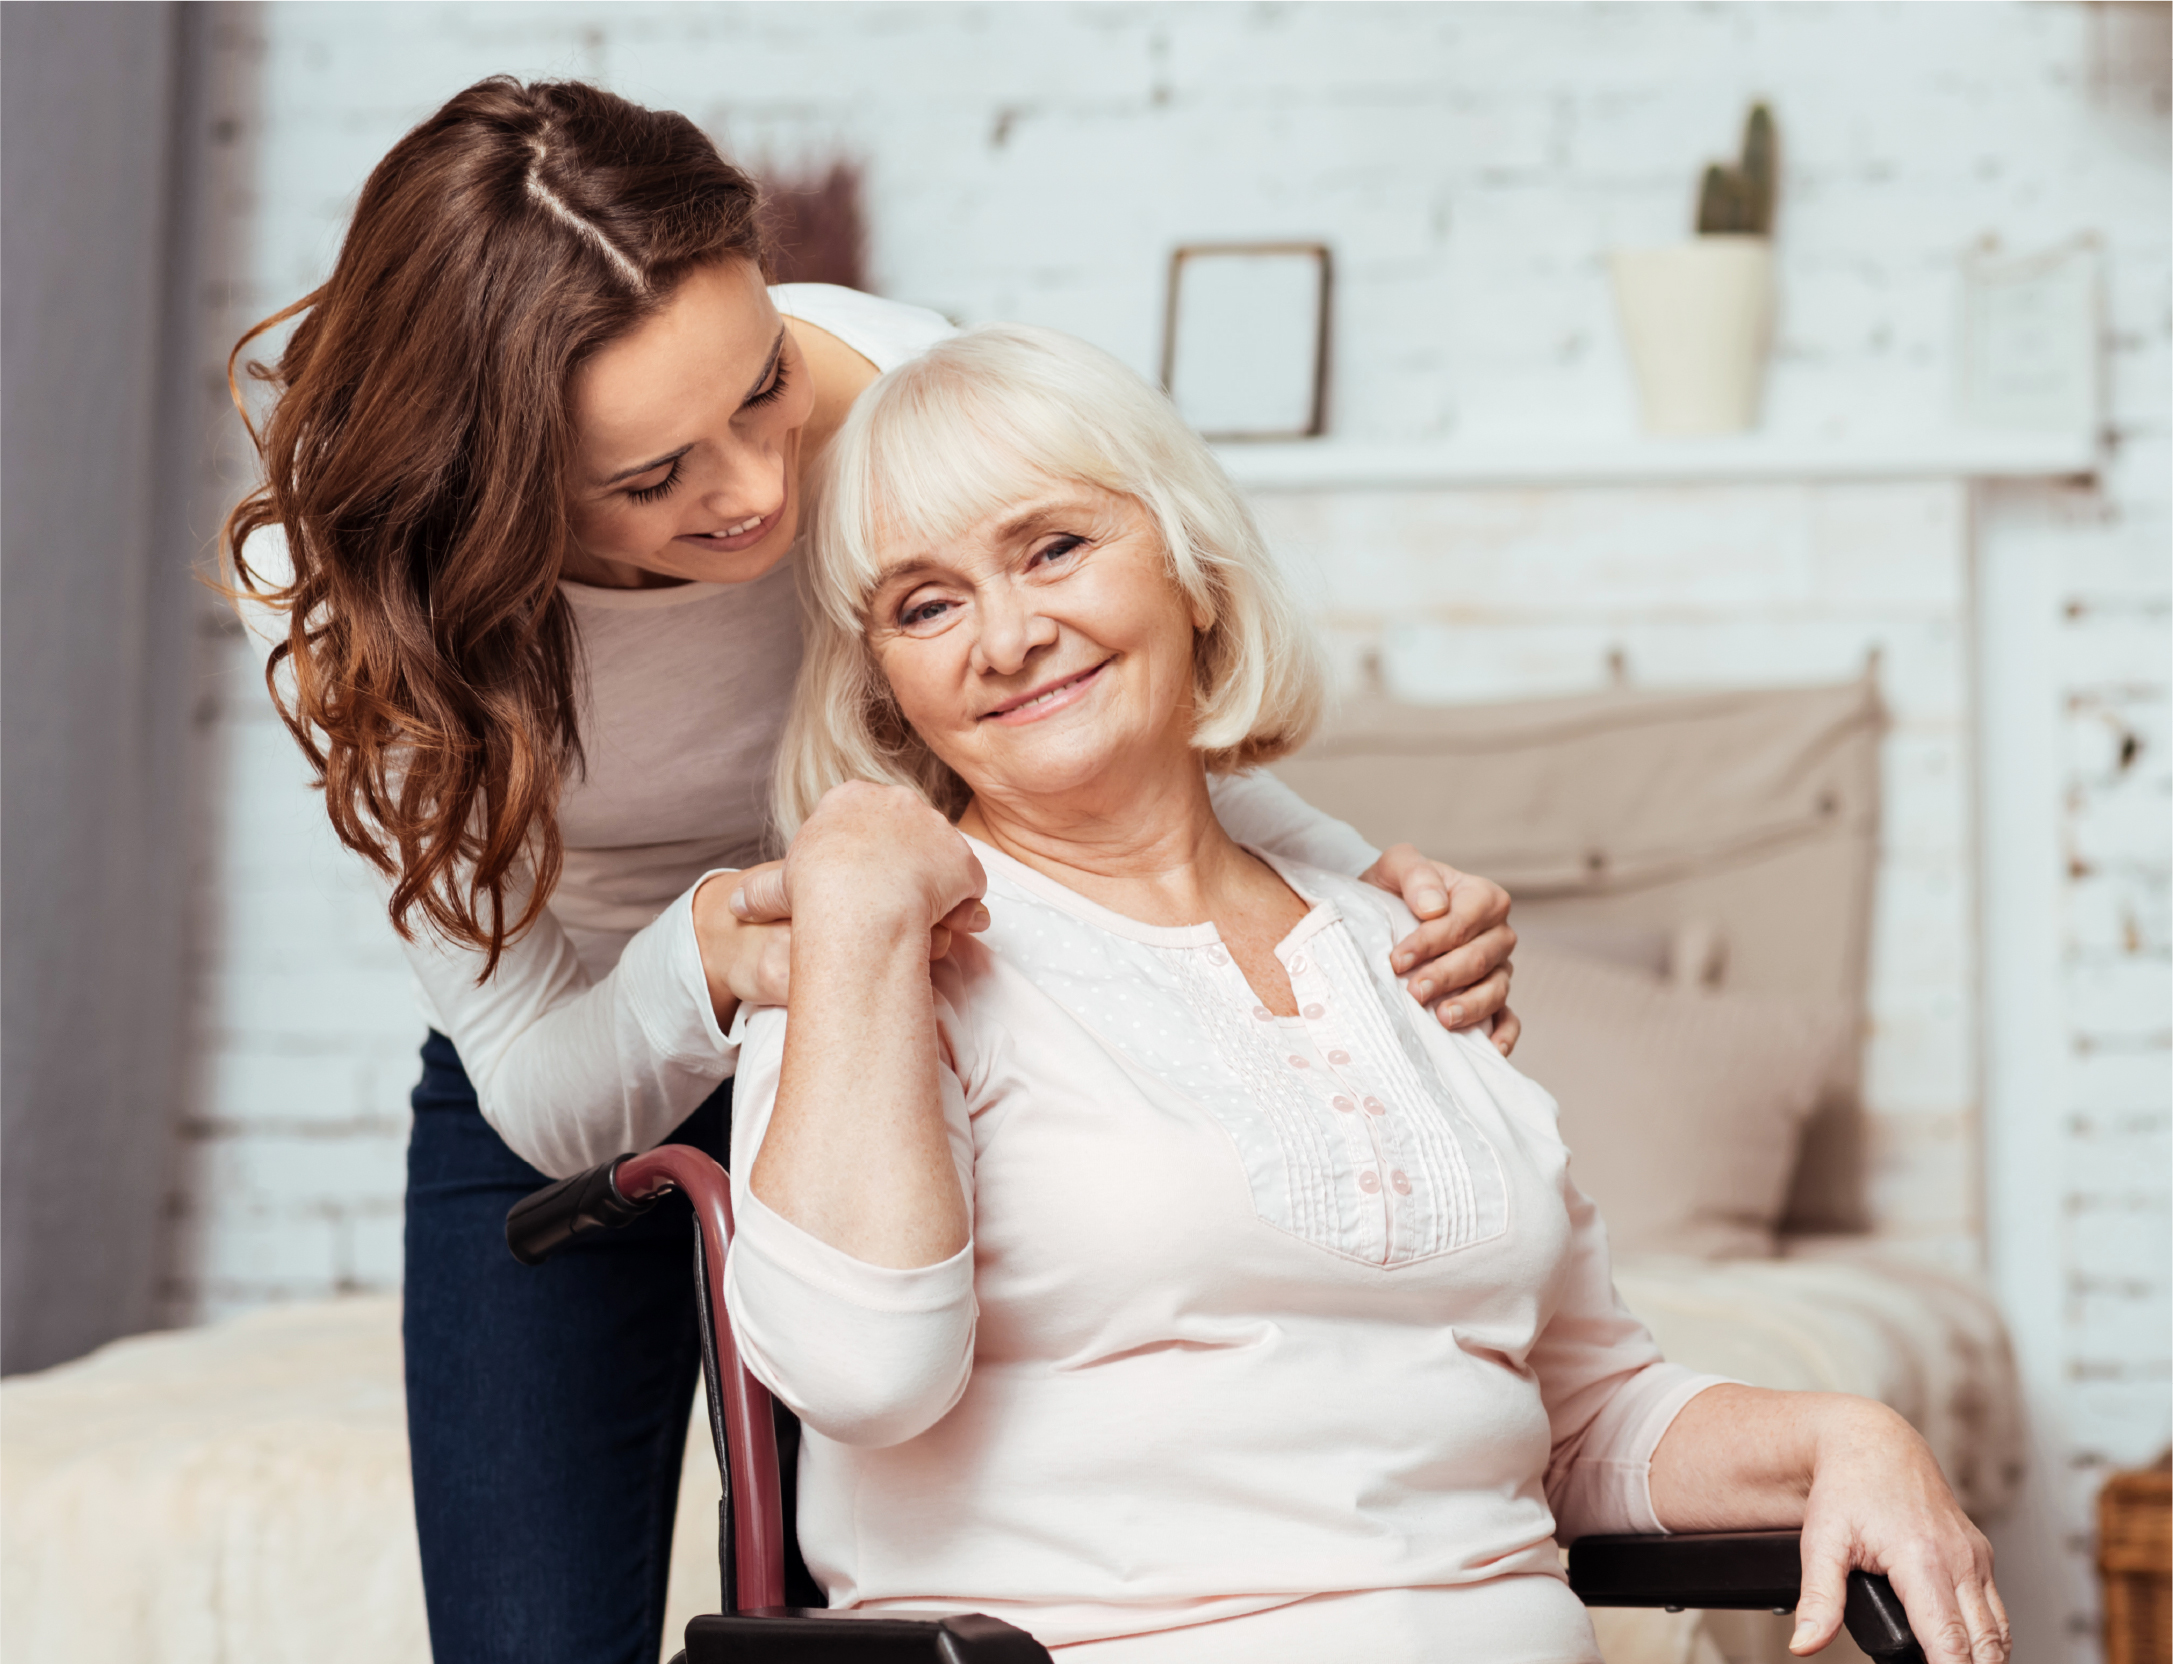 Why Long-Term Care Insurance?